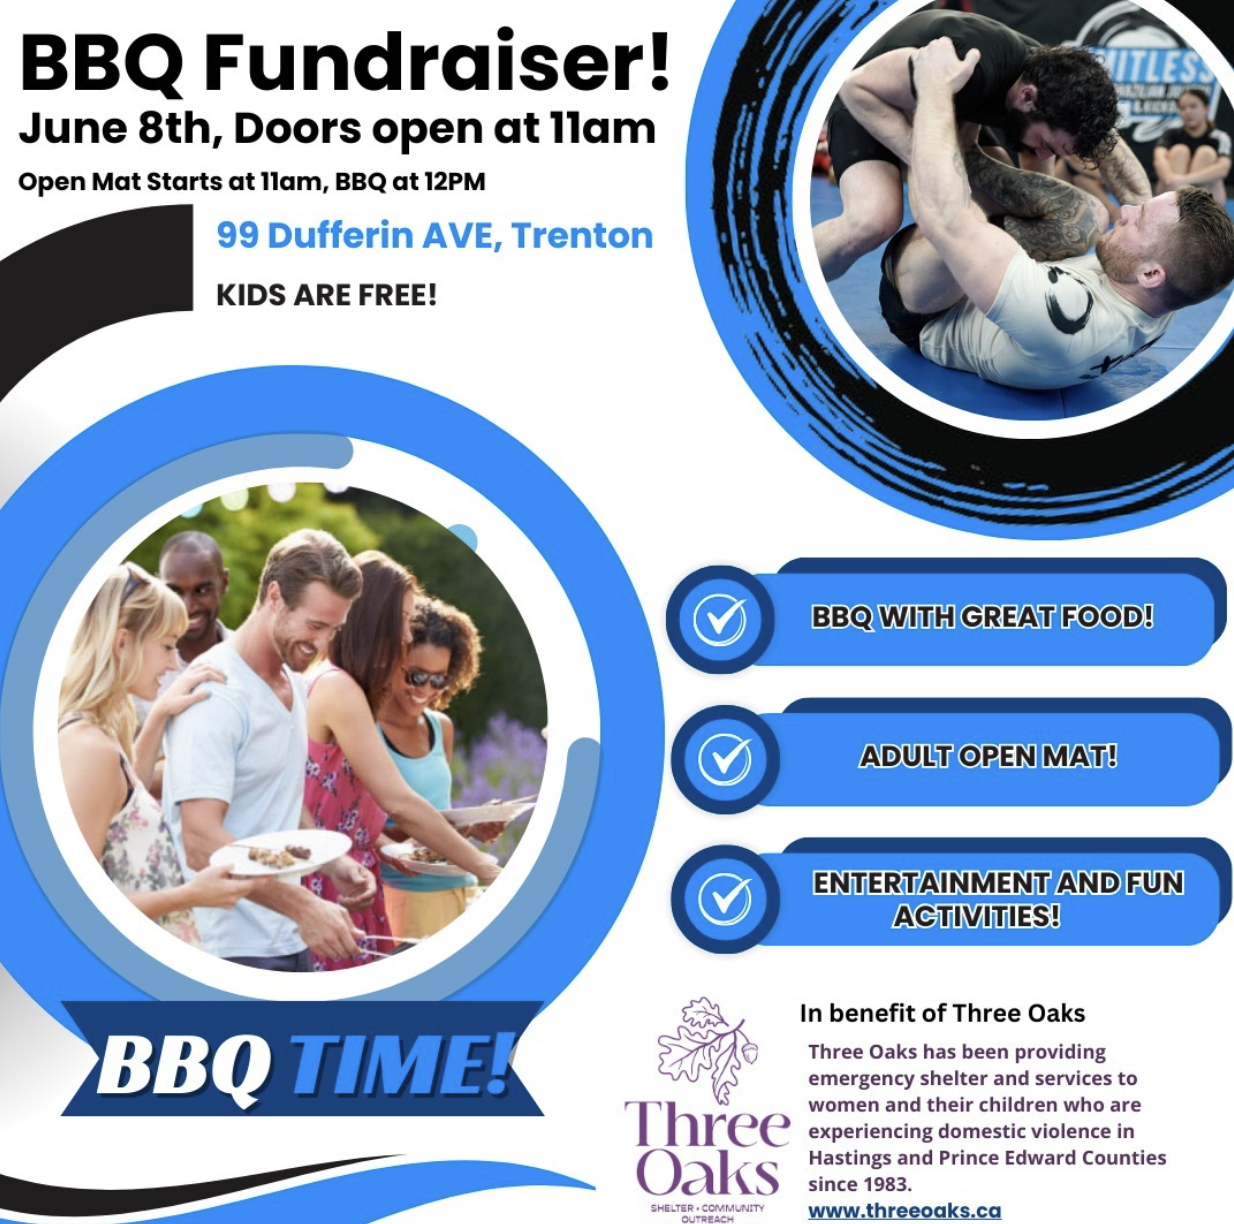 poster for BBQ fundraiser with event details.